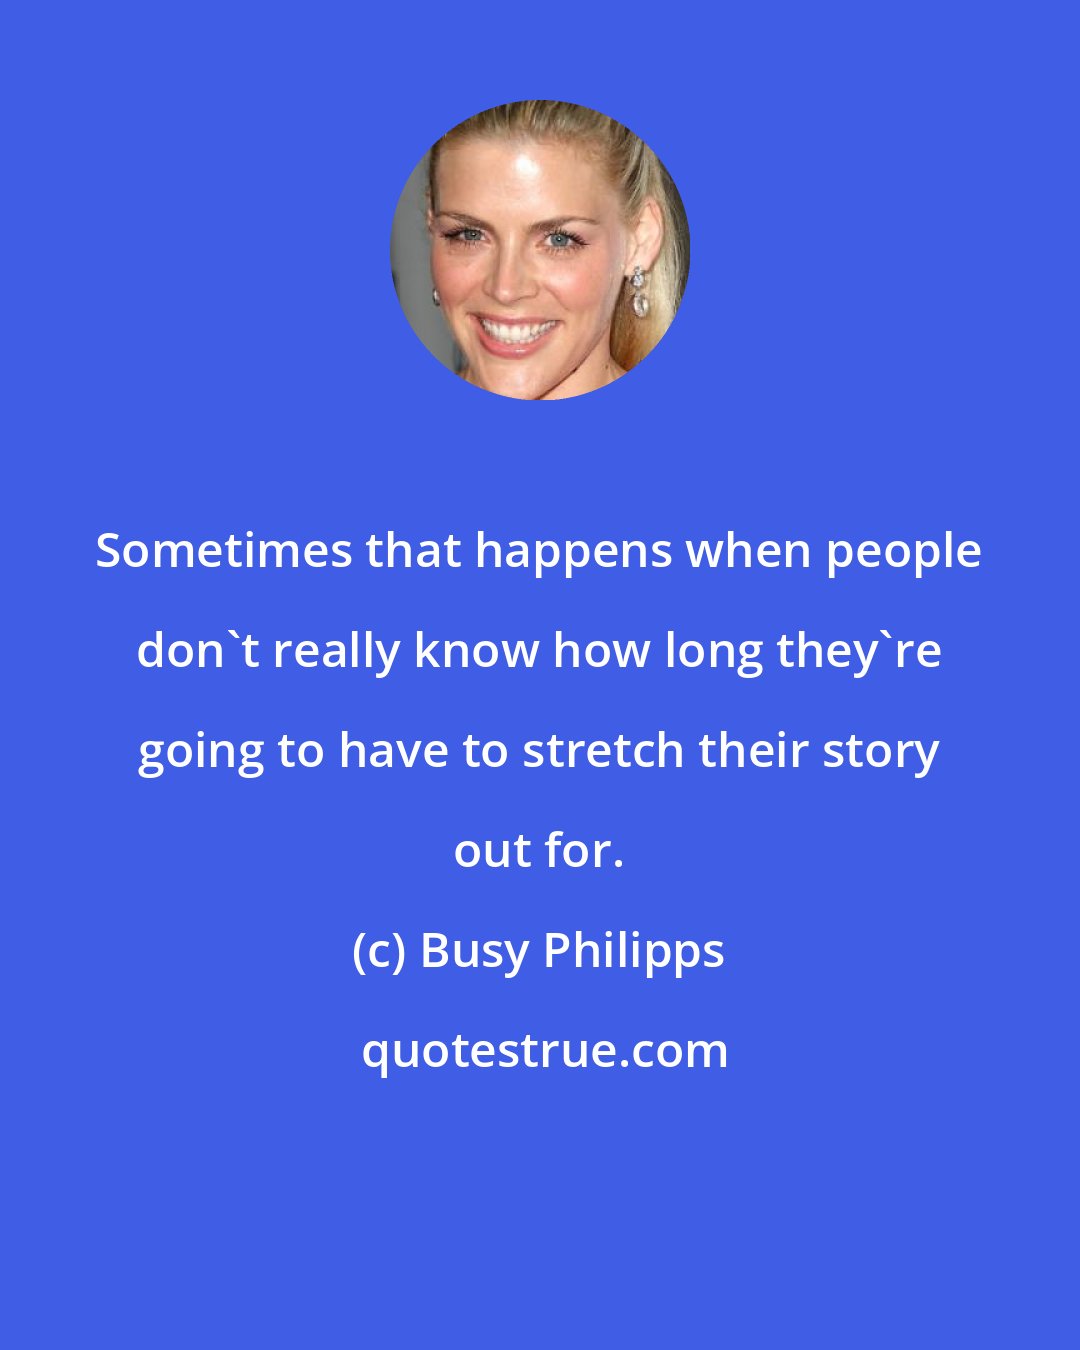 Busy Philipps: Sometimes that happens when people don't really know how long they're going to have to stretch their story out for.